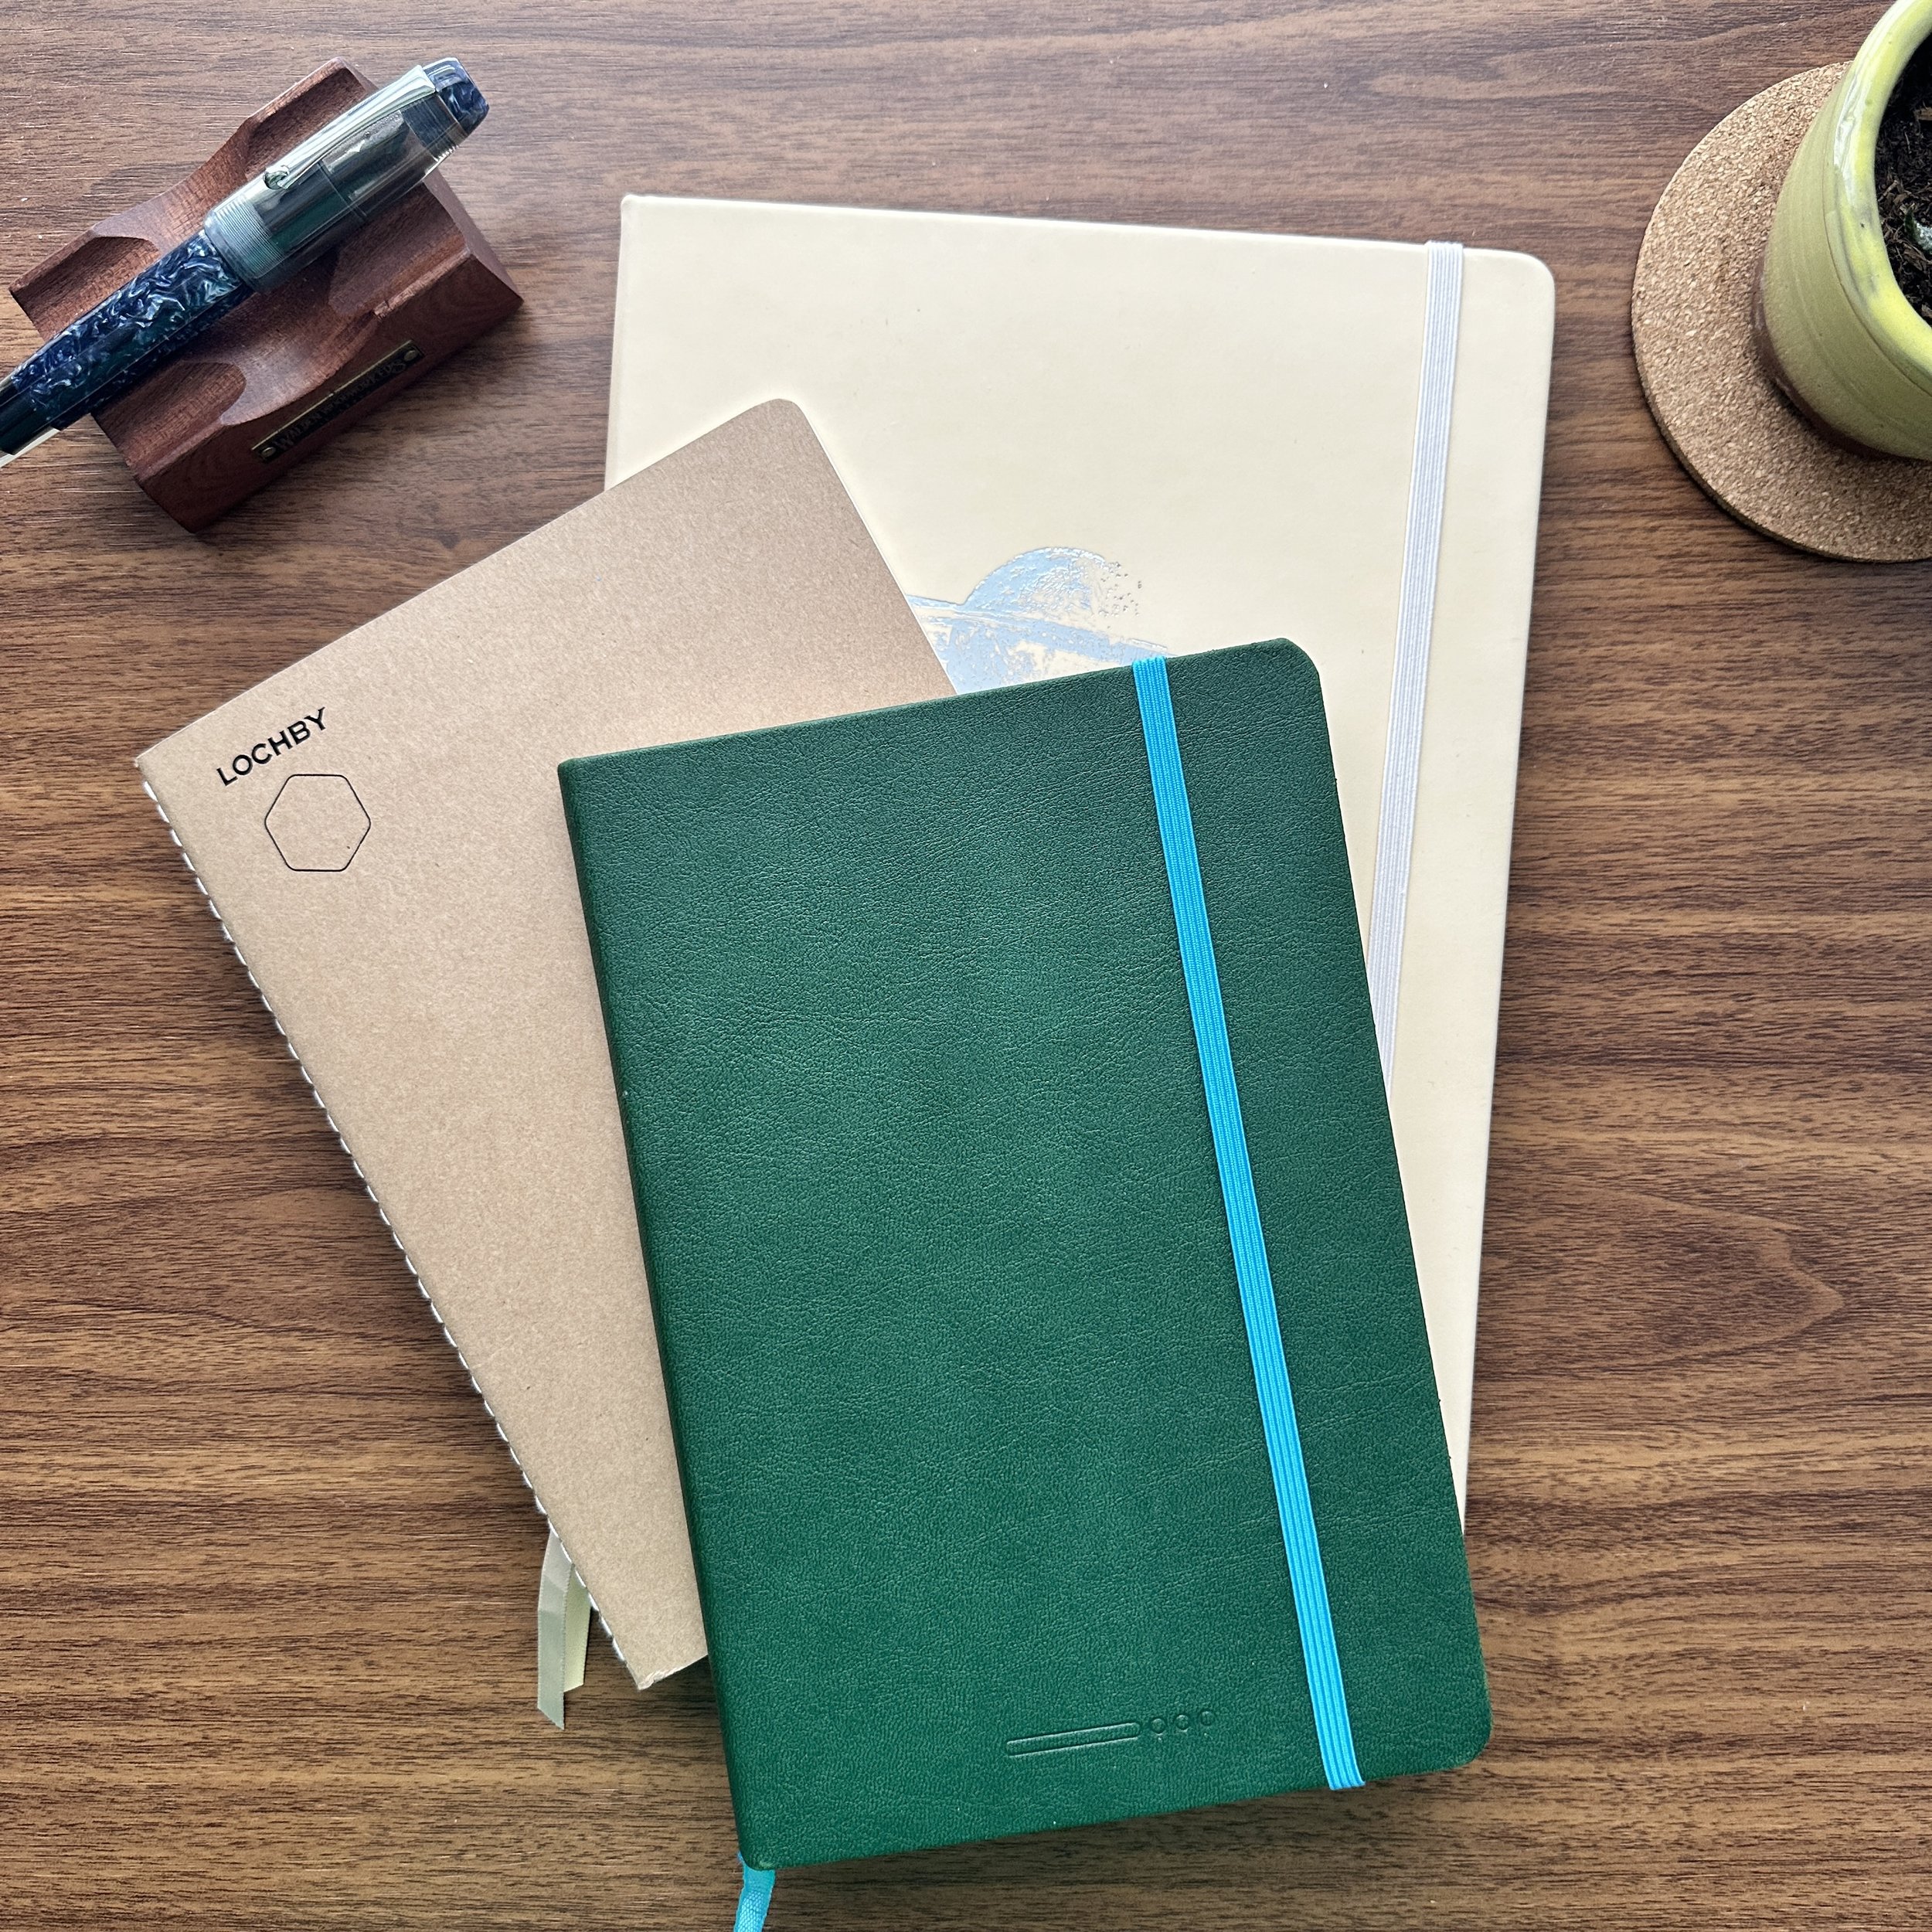 Clairefontaine French-Ruled Looseleaf Sheets — The Gentleman Stationer